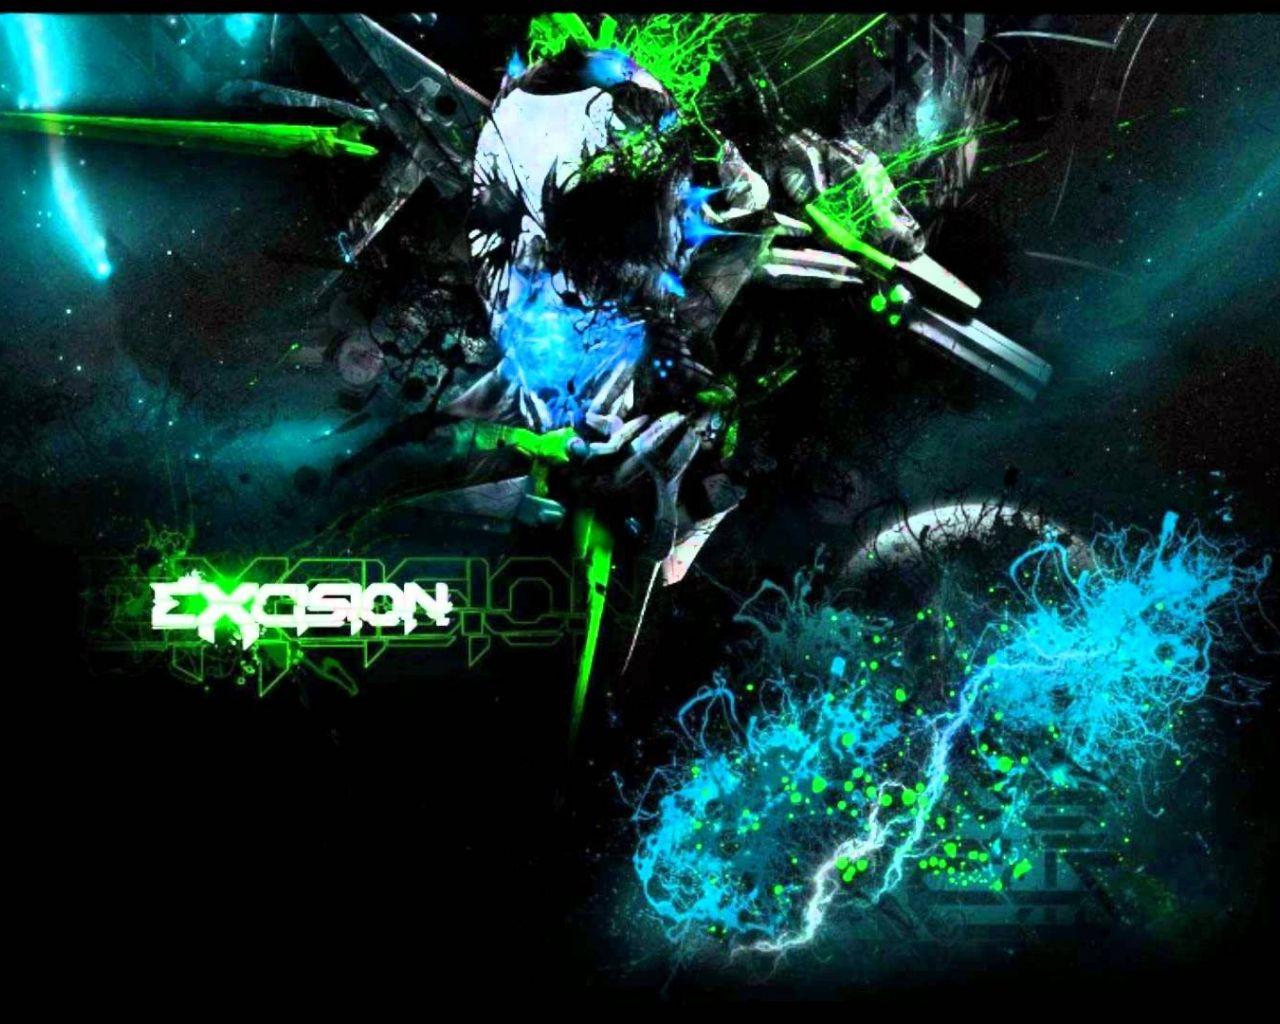 Excision HD wallpapers  Pxfuel